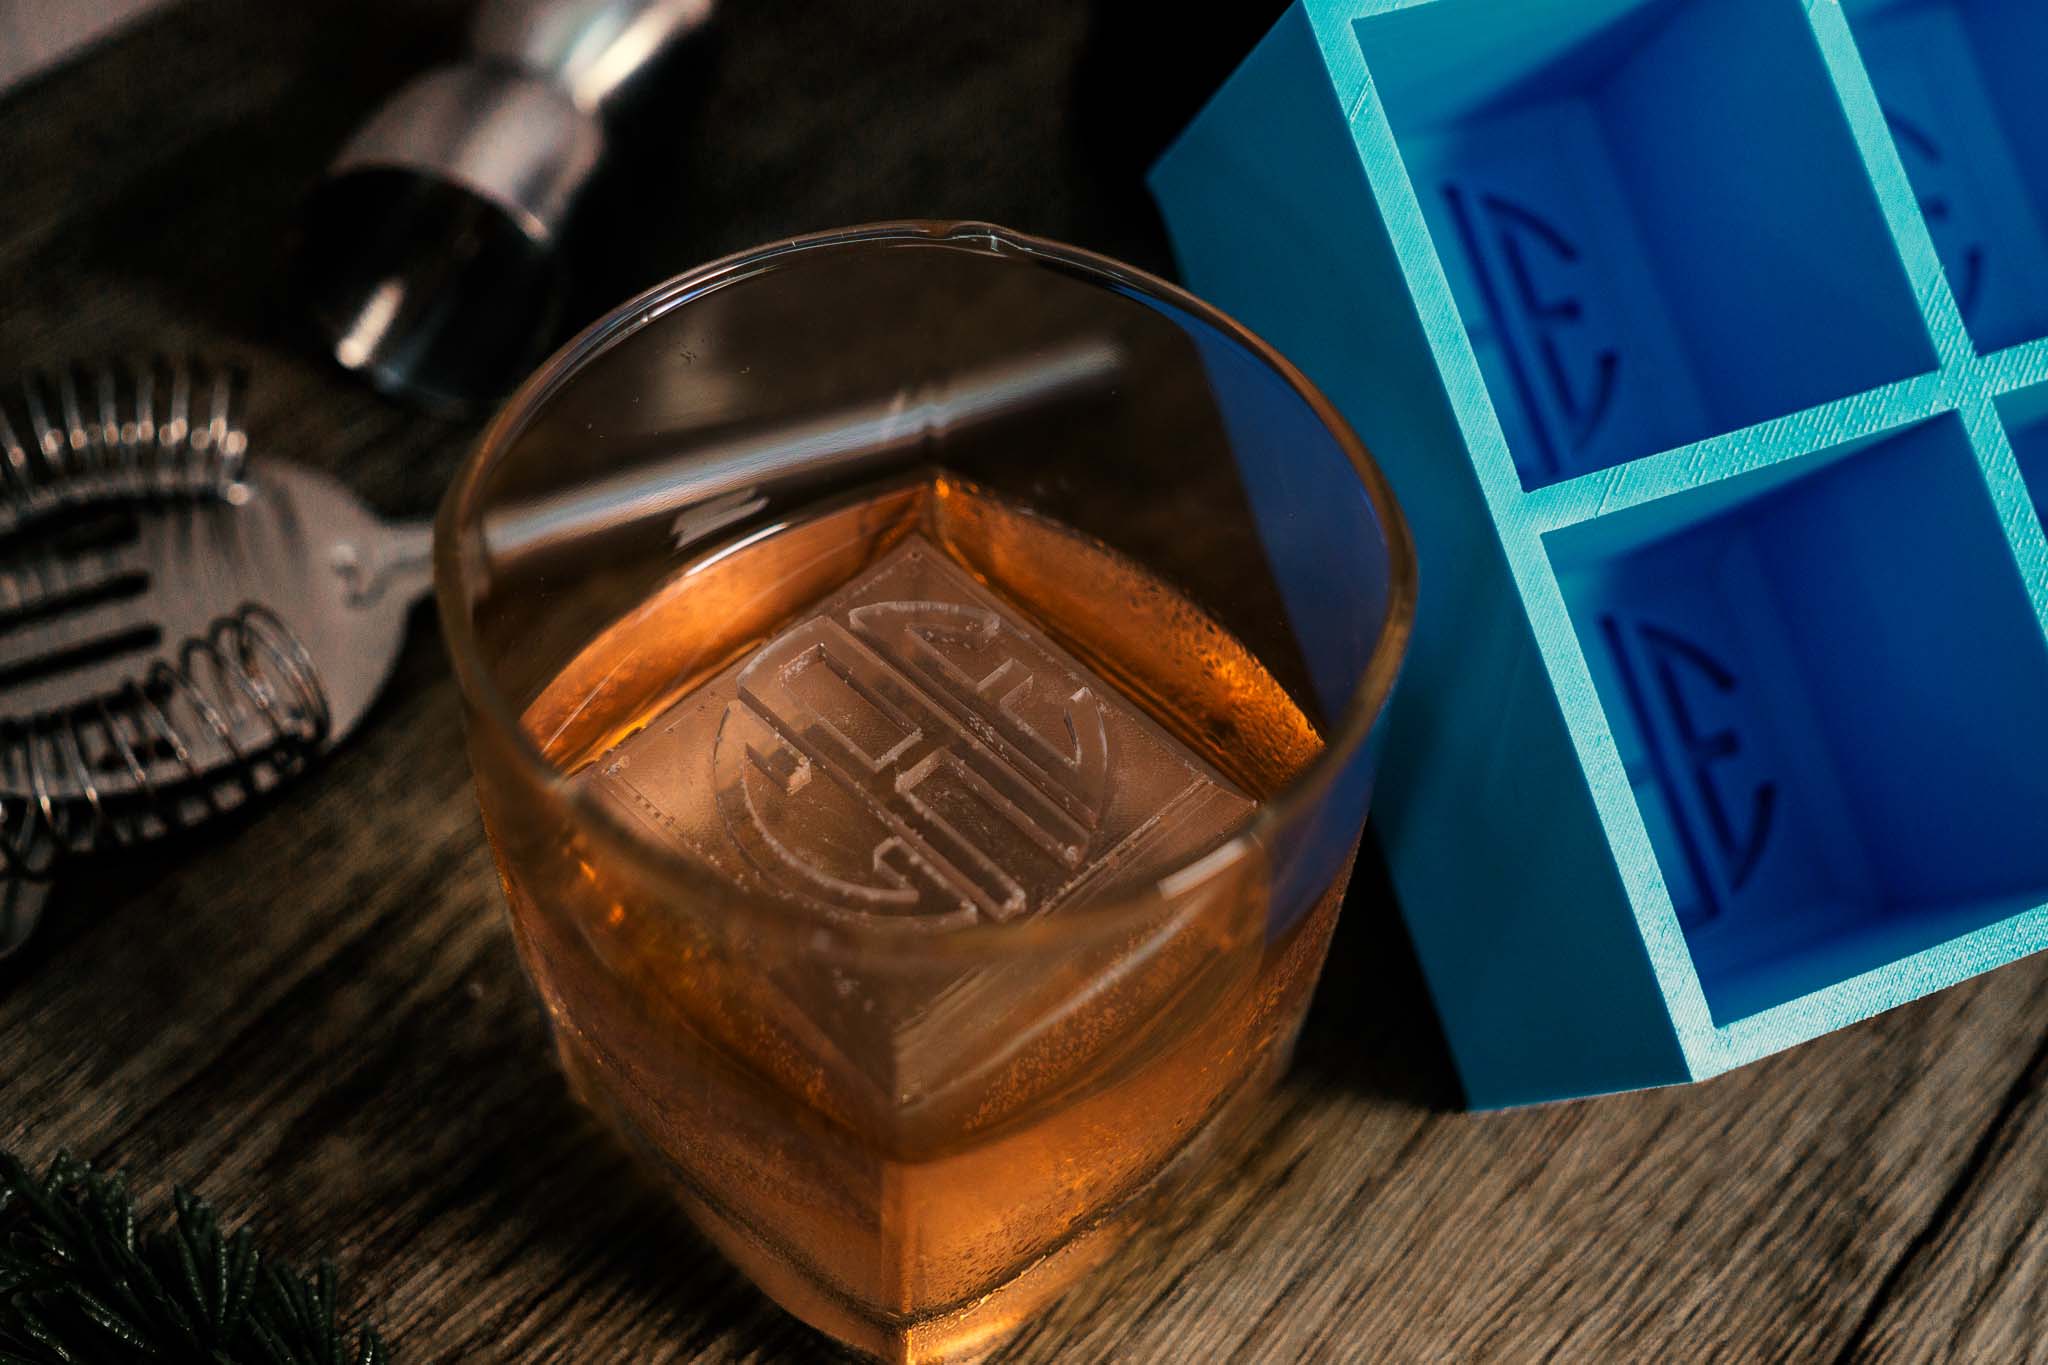 5 Reasons A Personalized Ice Tray Is The Perfect Gift – Siligrams